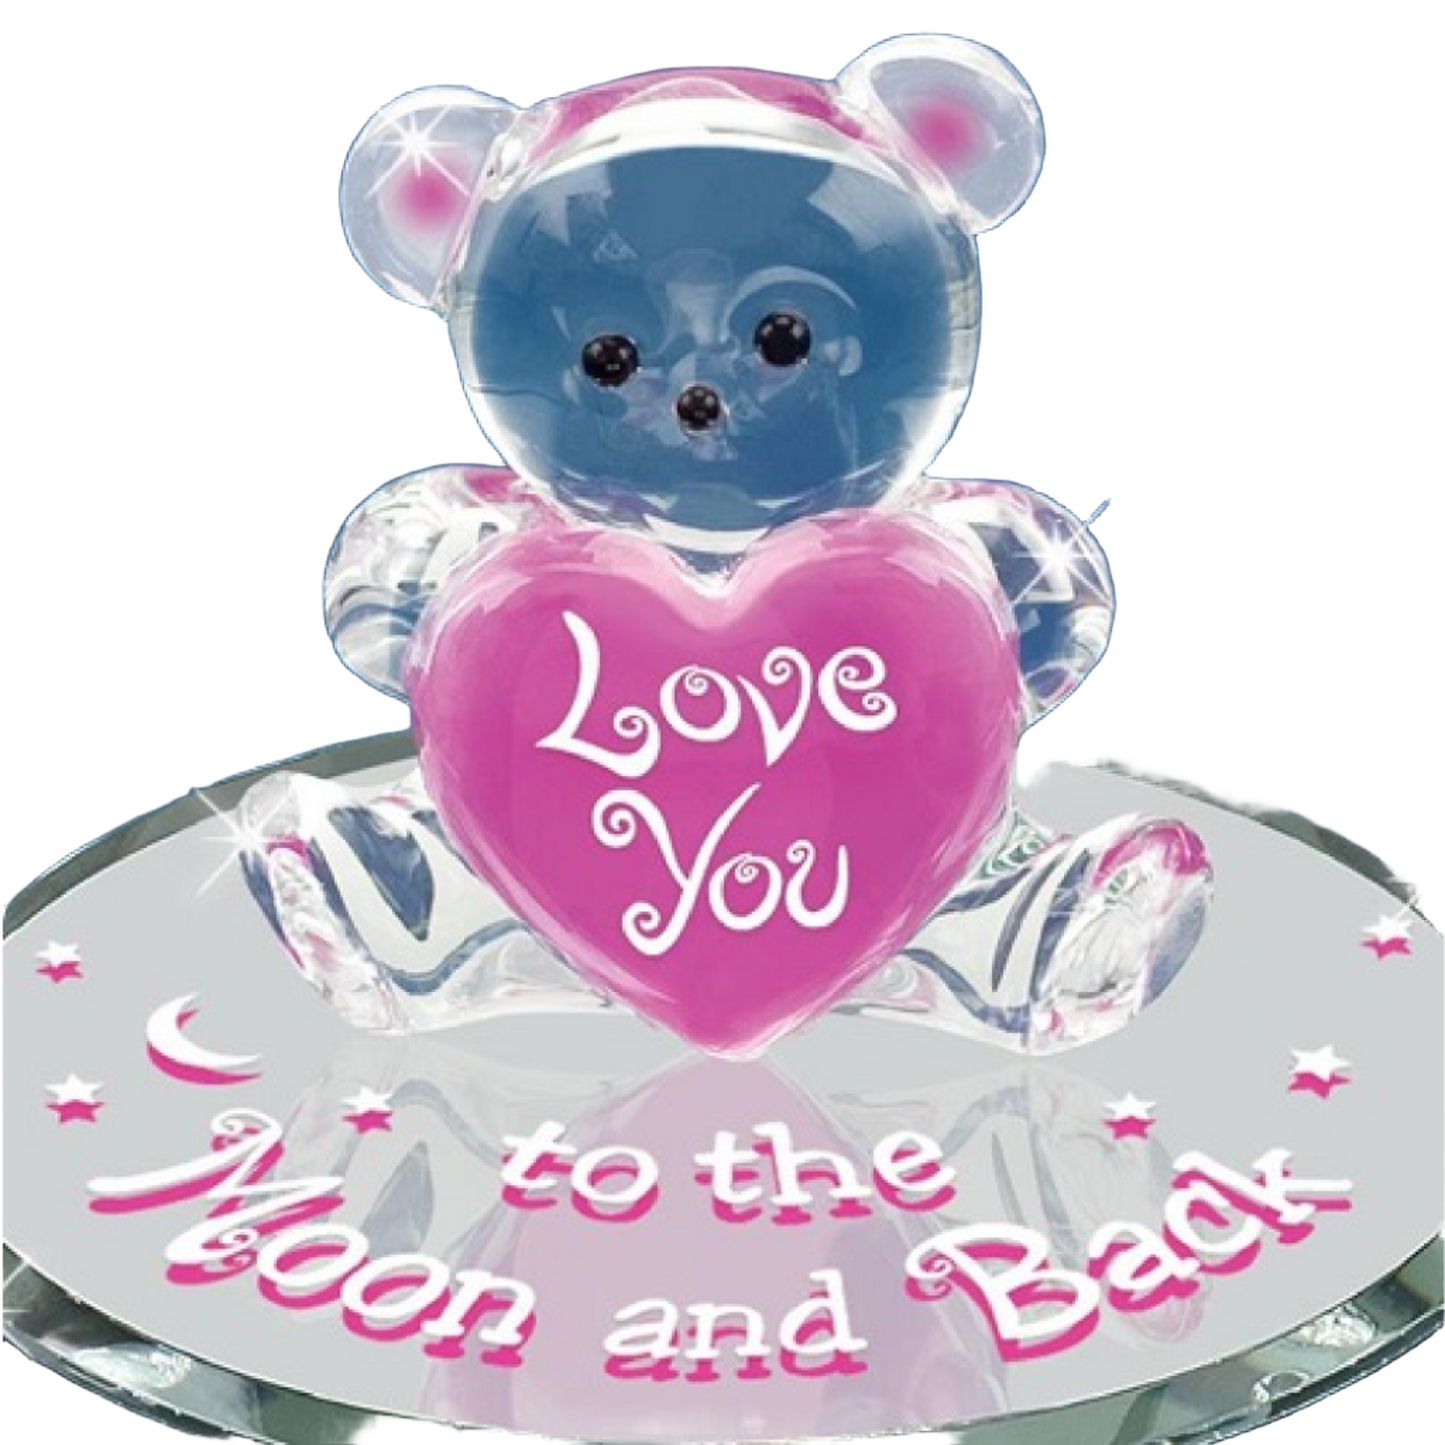 Glass Baron Bear "Love You to the Moon and Back" Pink Heart Figure